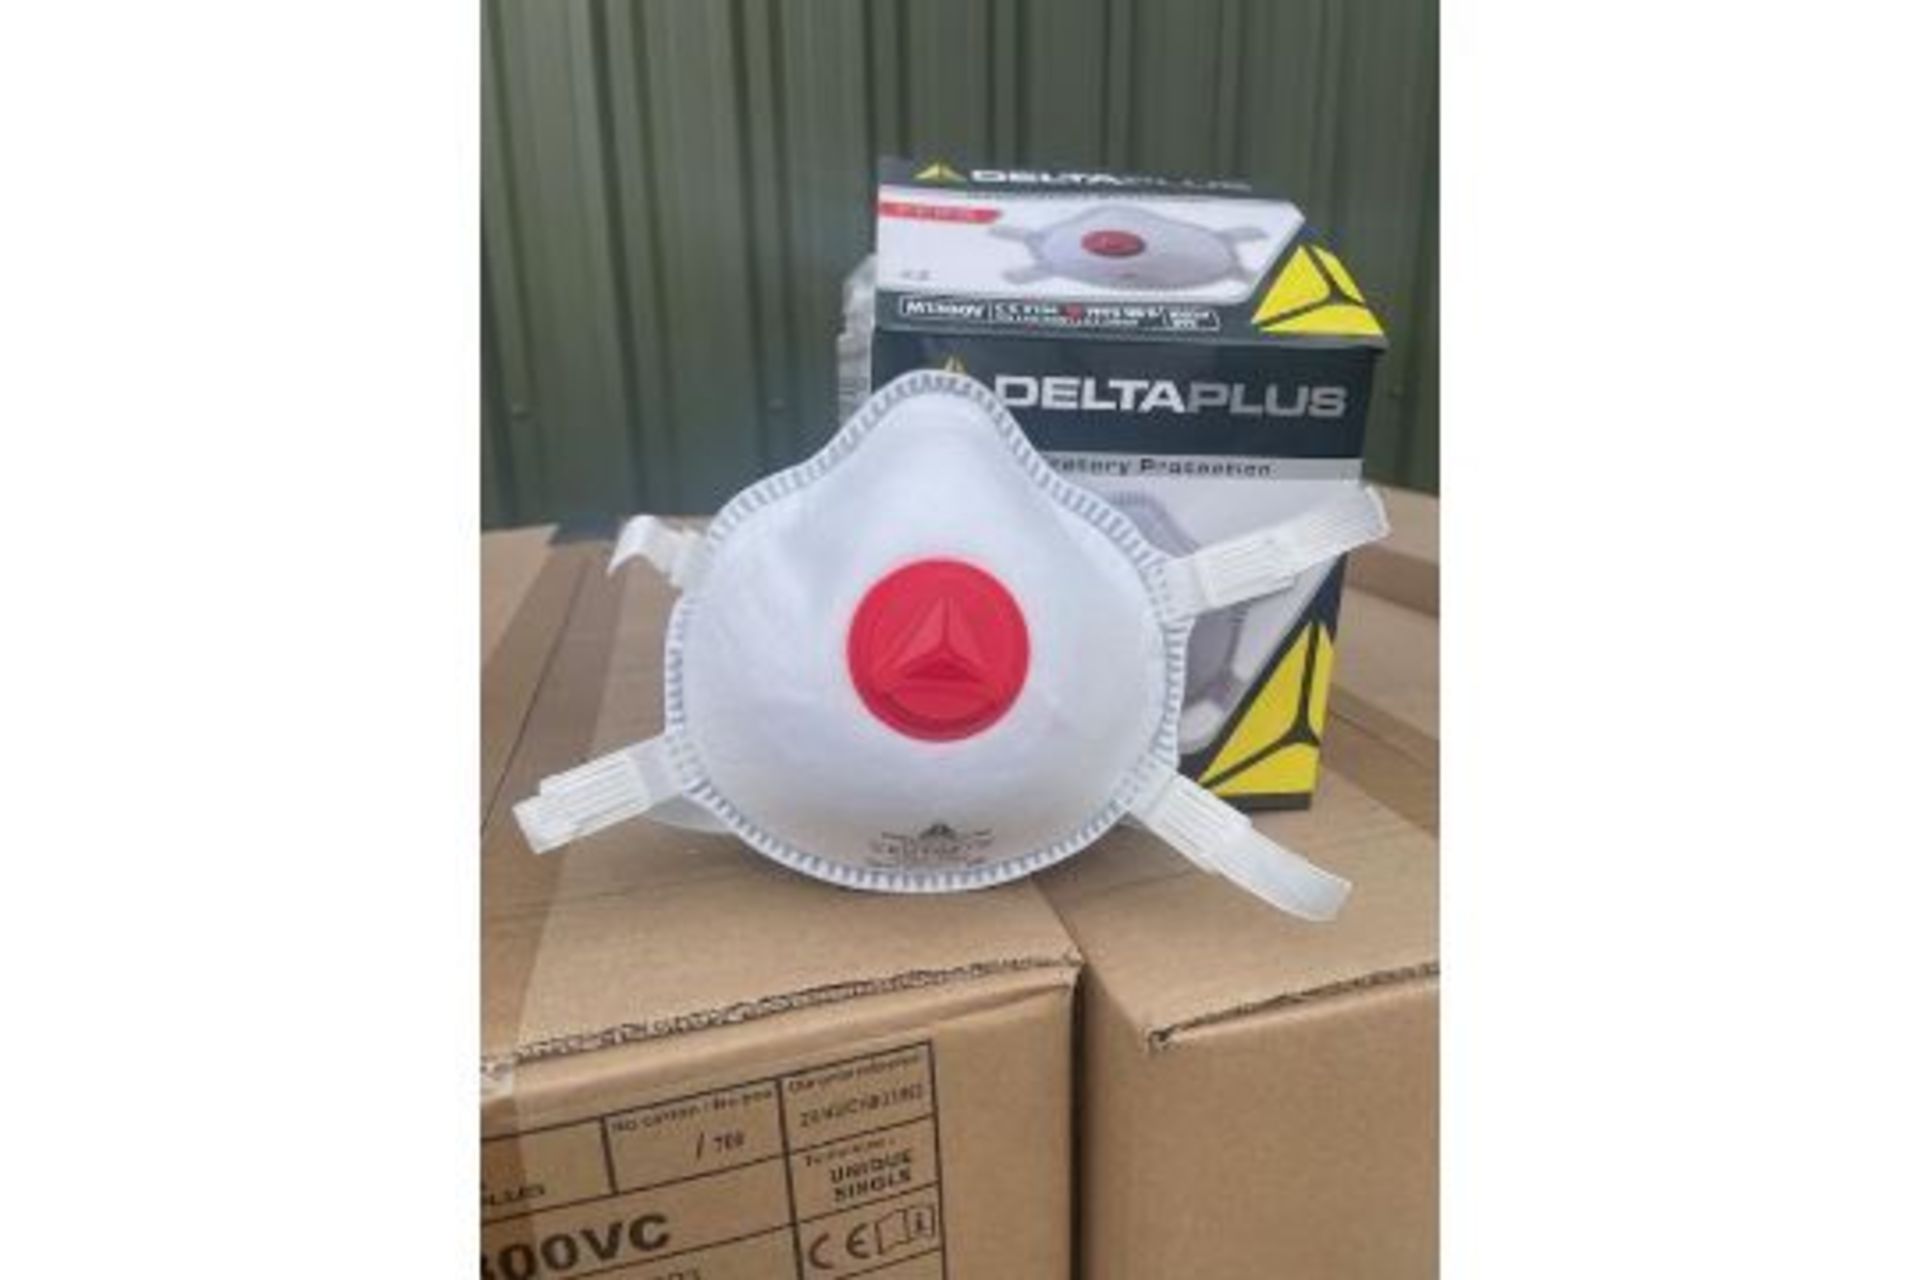 1200 NEW UNUSED DELTA PLUS HIGH QUALITY DUST RESPIRATOR MASKS CE MARKED WITH VALVE - Image 2 of 7